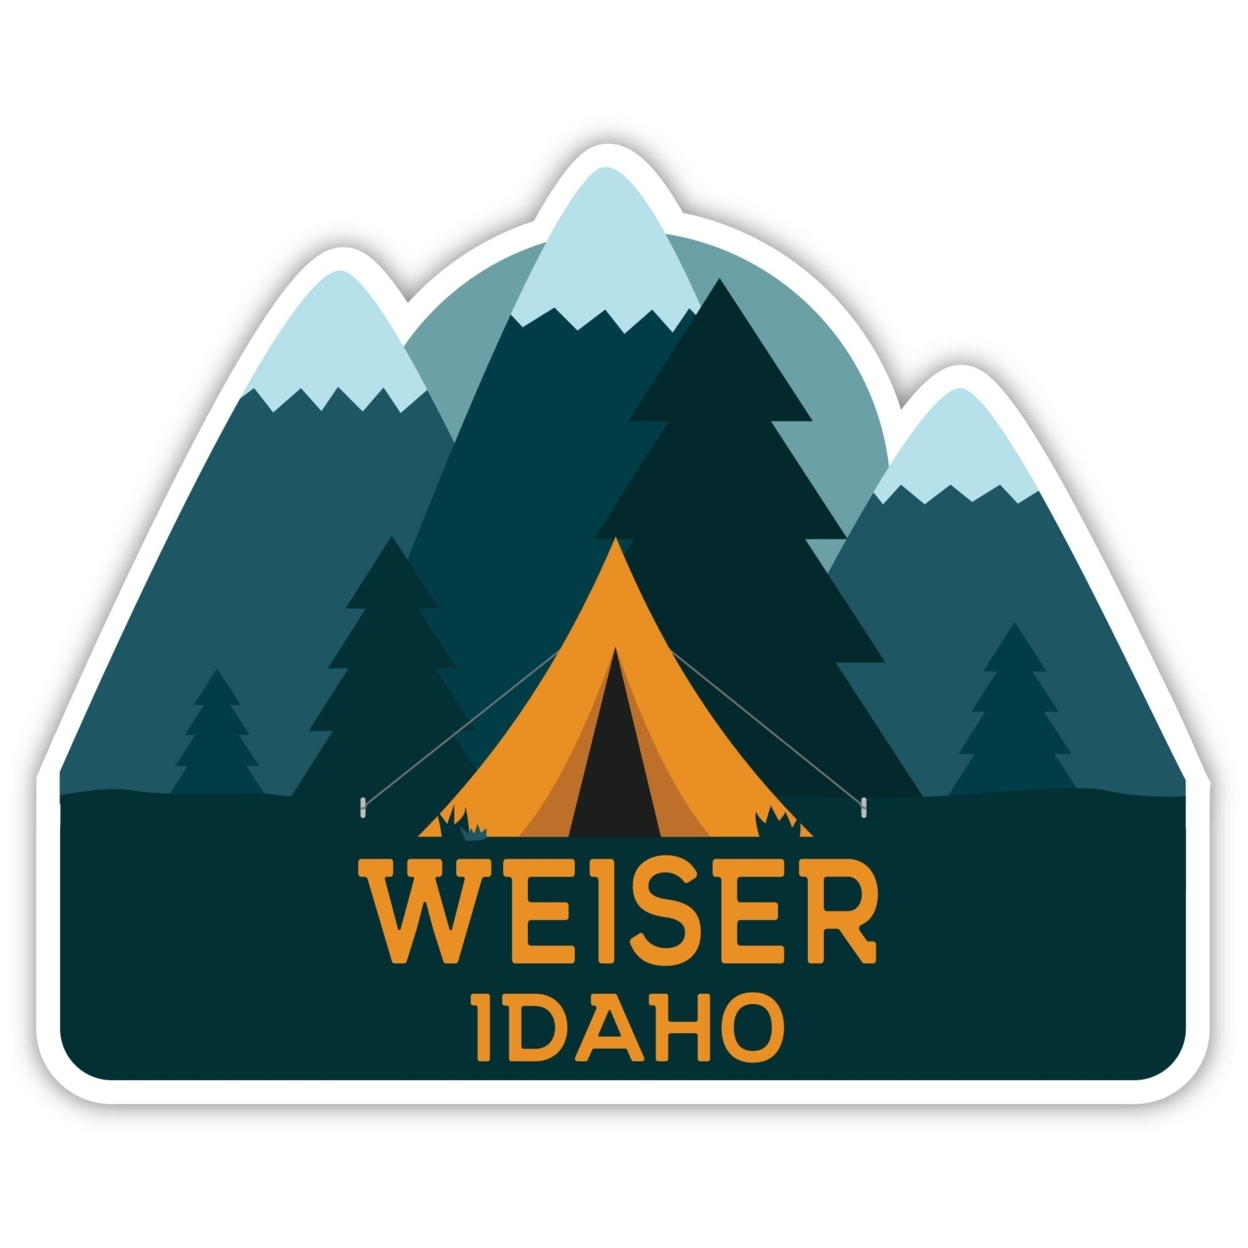 Weiser Idaho Souvenir Decorative Stickers (Choose Theme And Size) - Single Unit, 4-Inch, Tent